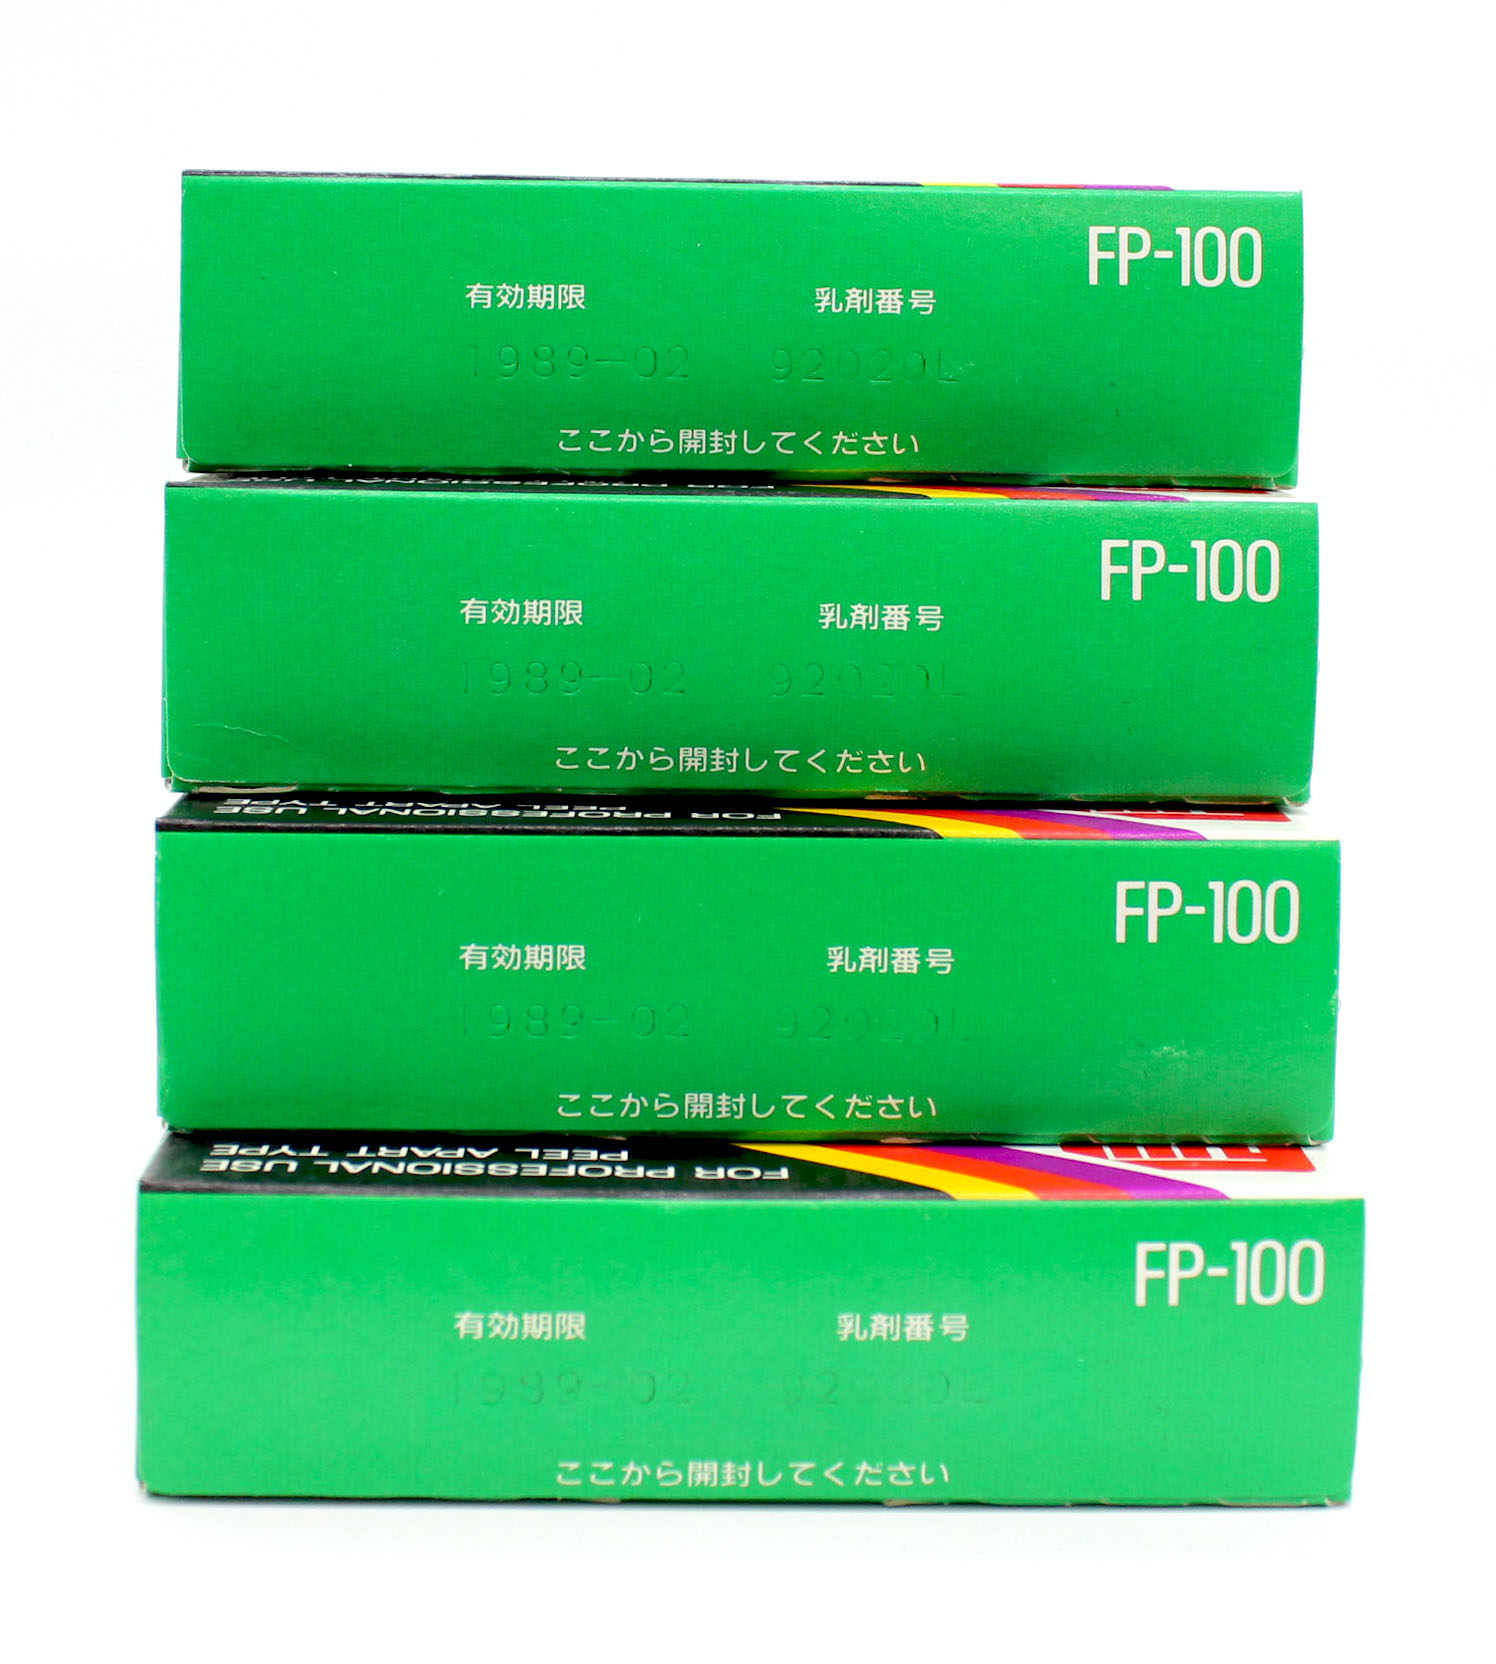  Fujifilm FP-100 Instant Color Film Set of 4 (Exp 1989) from Japan Photo 2